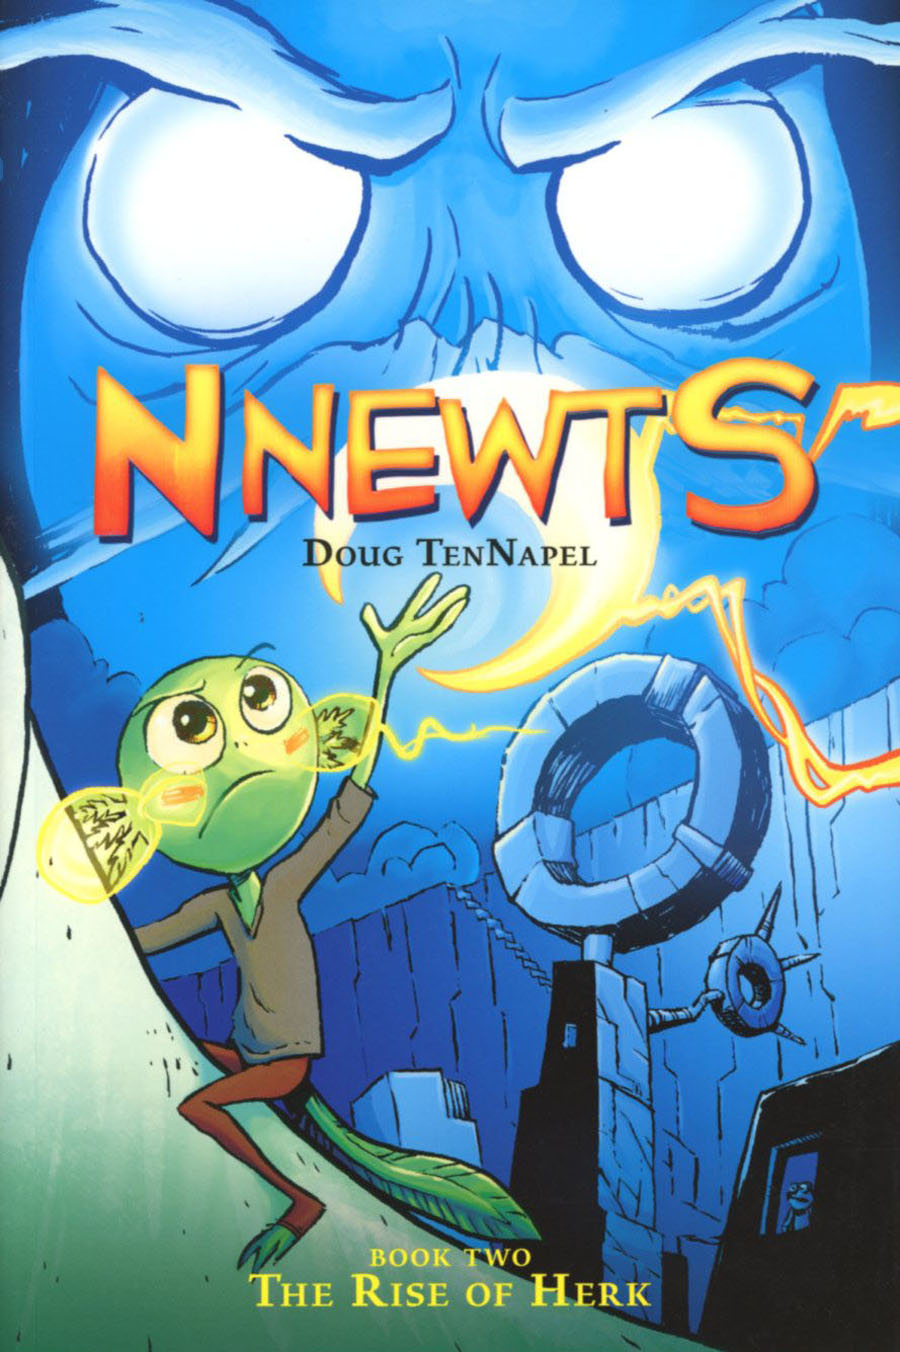 Nnewts Vol 2 The Rise Of Herk TP